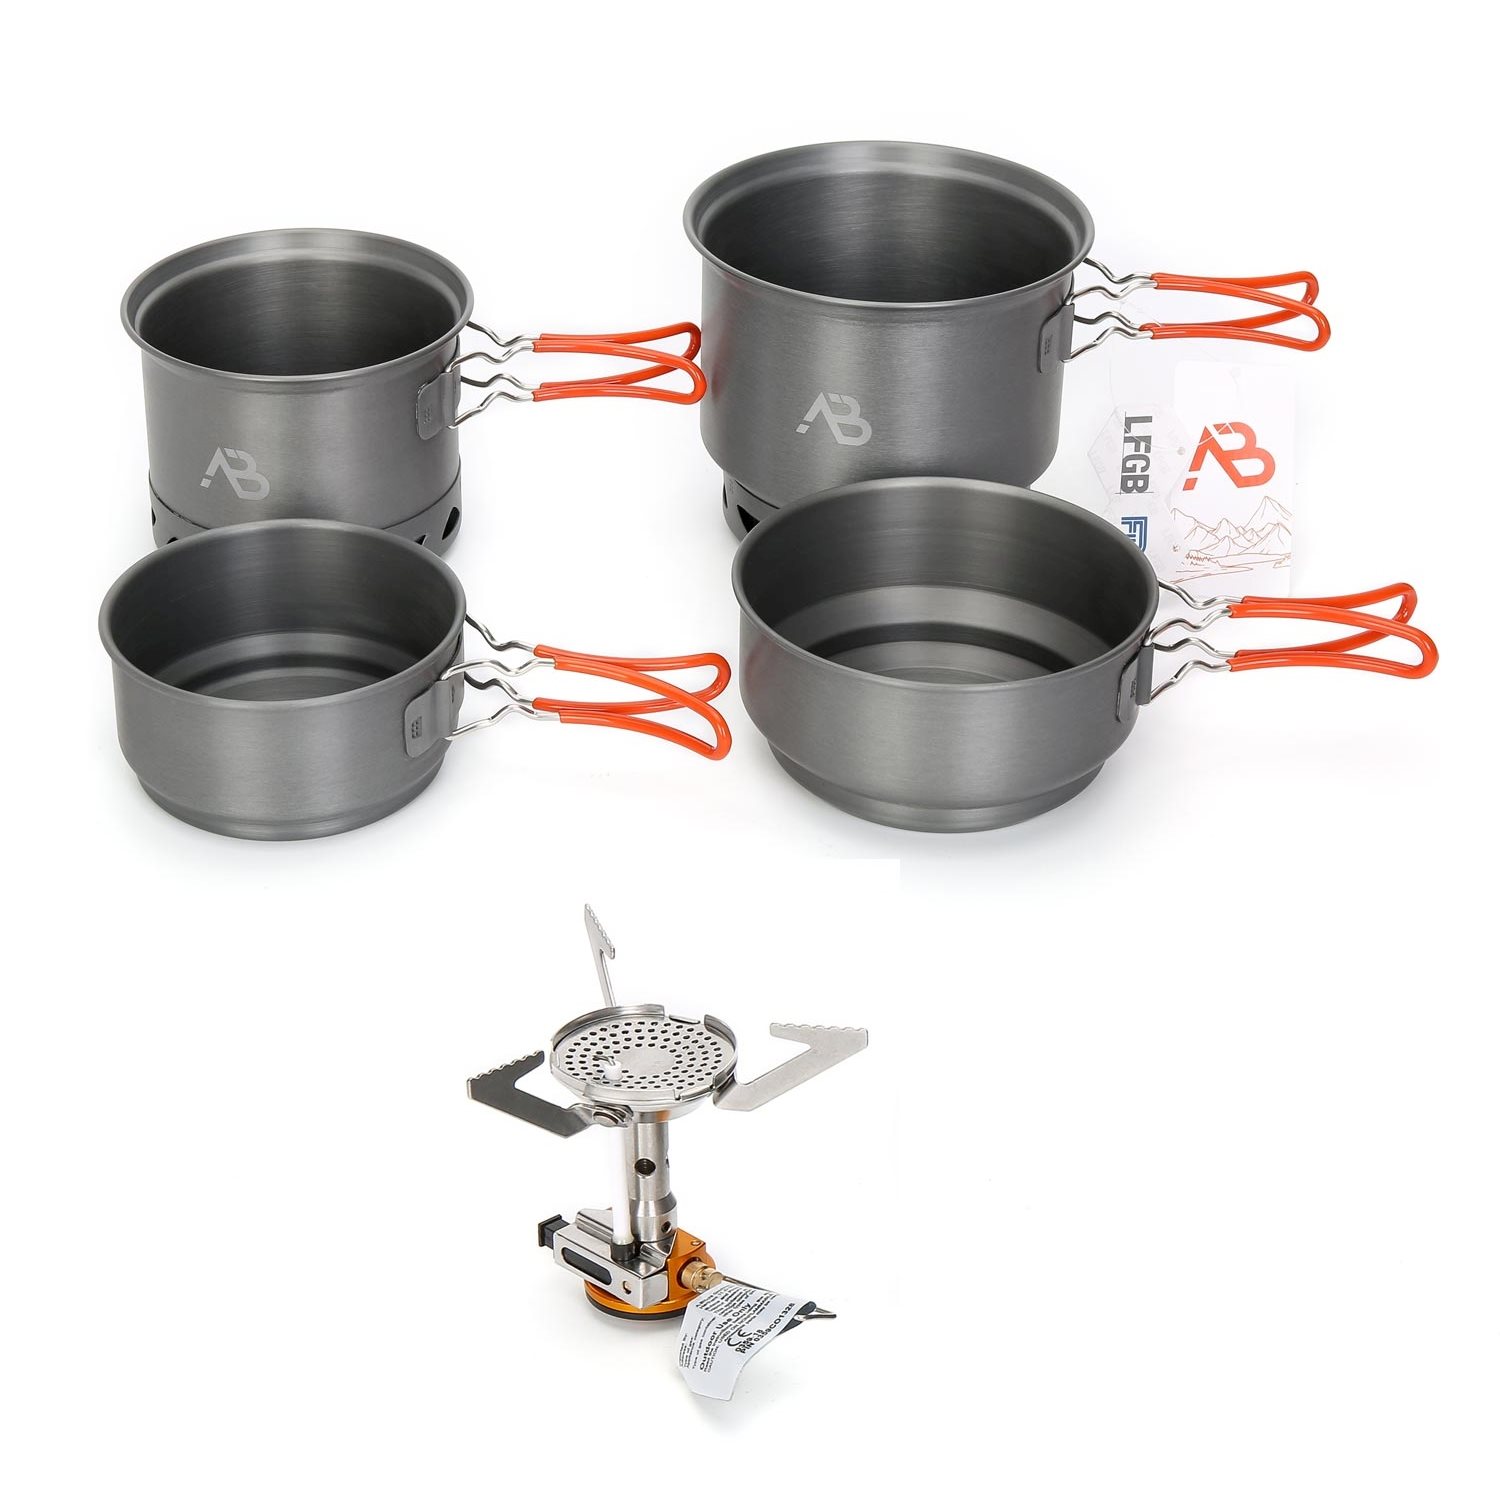 Camping set with STAR X1 cooker AB 110890 L-11